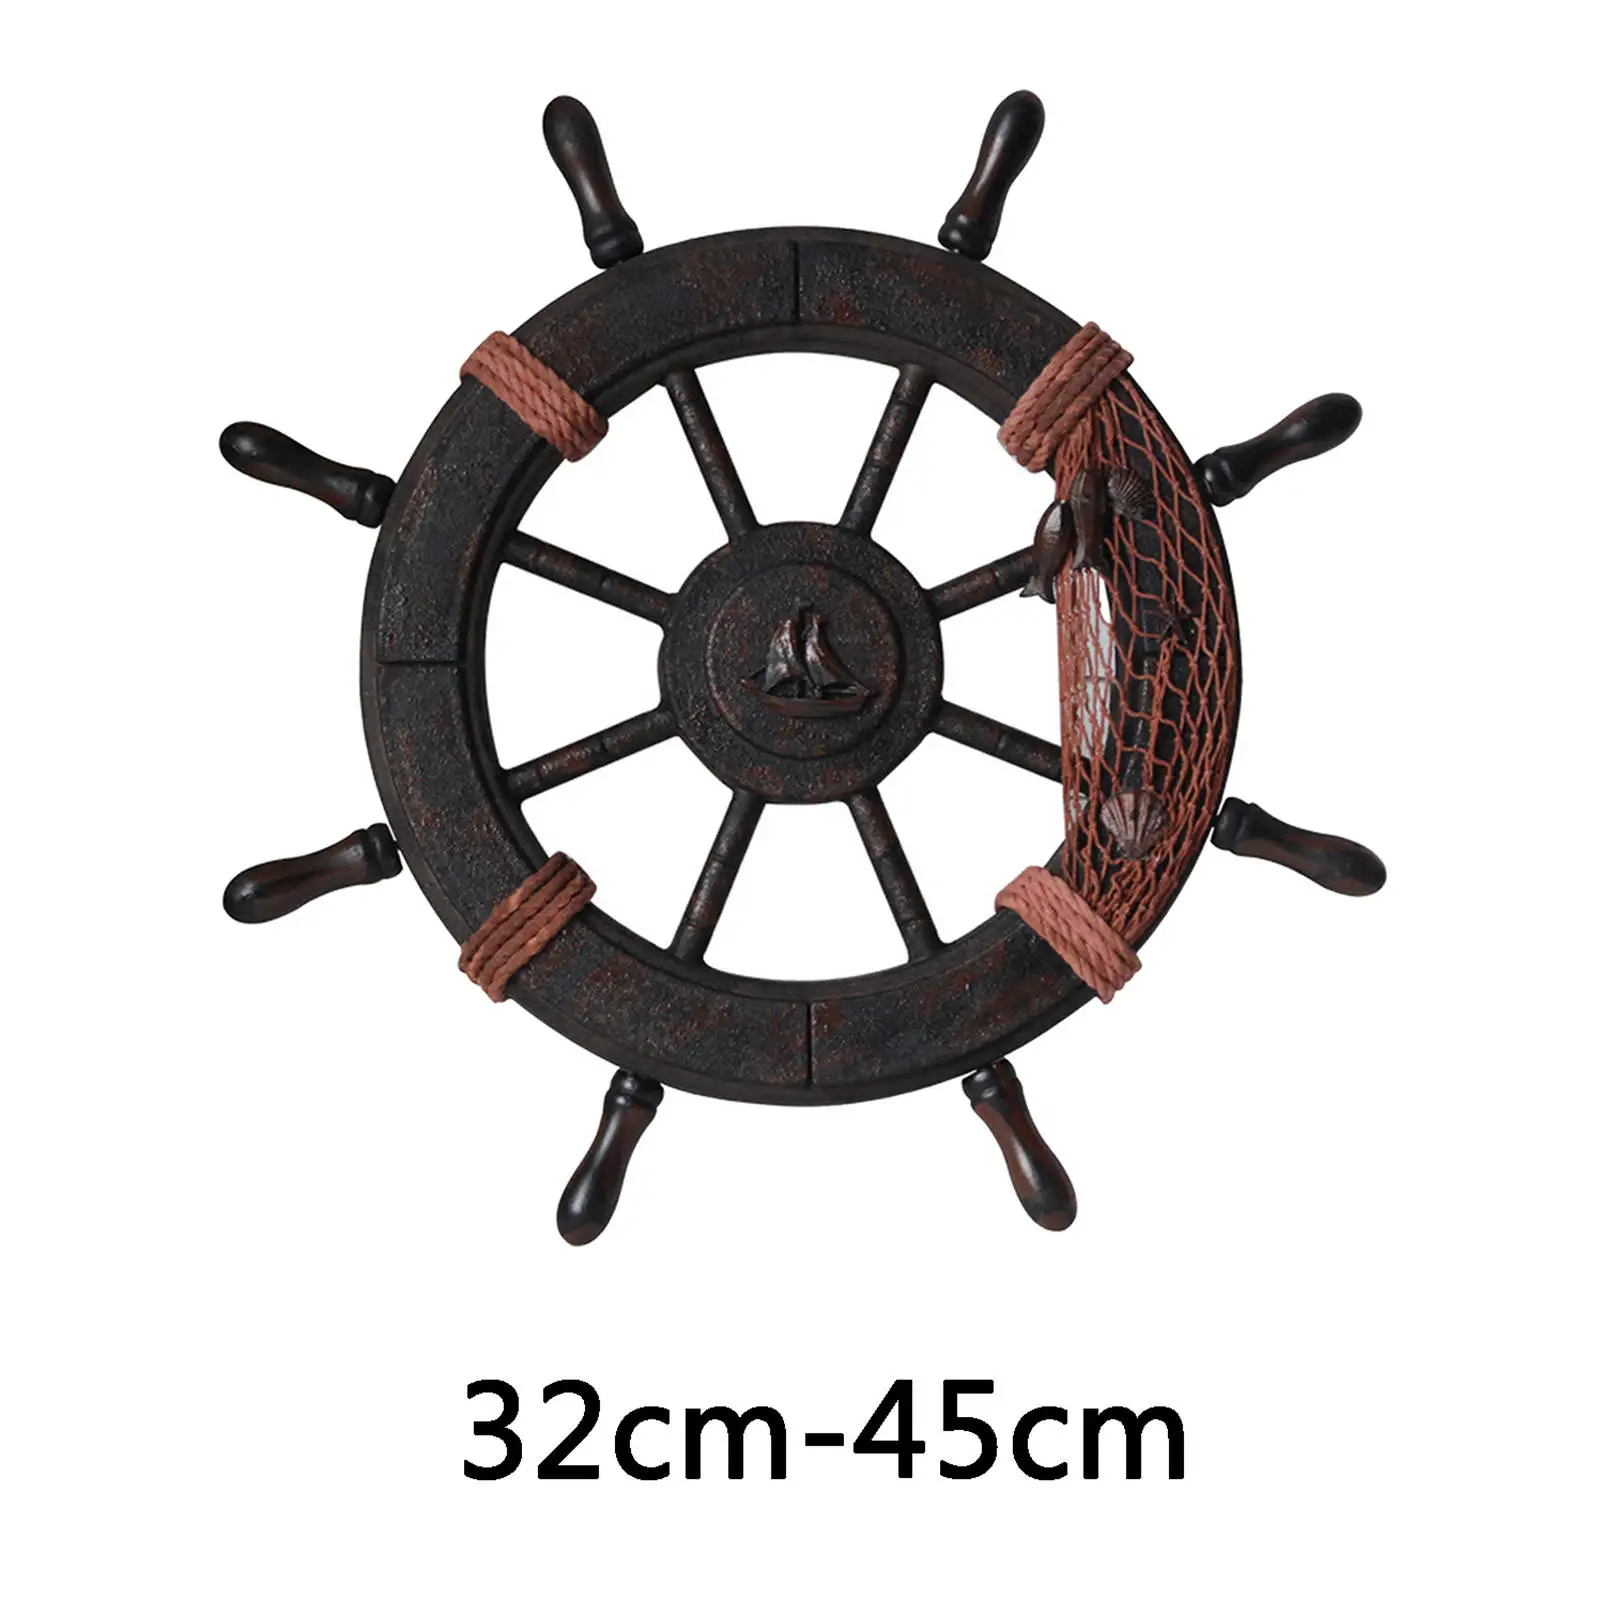 Vintage Ship Wheel Wood Wall Hanging Home Decor Pirate Steering